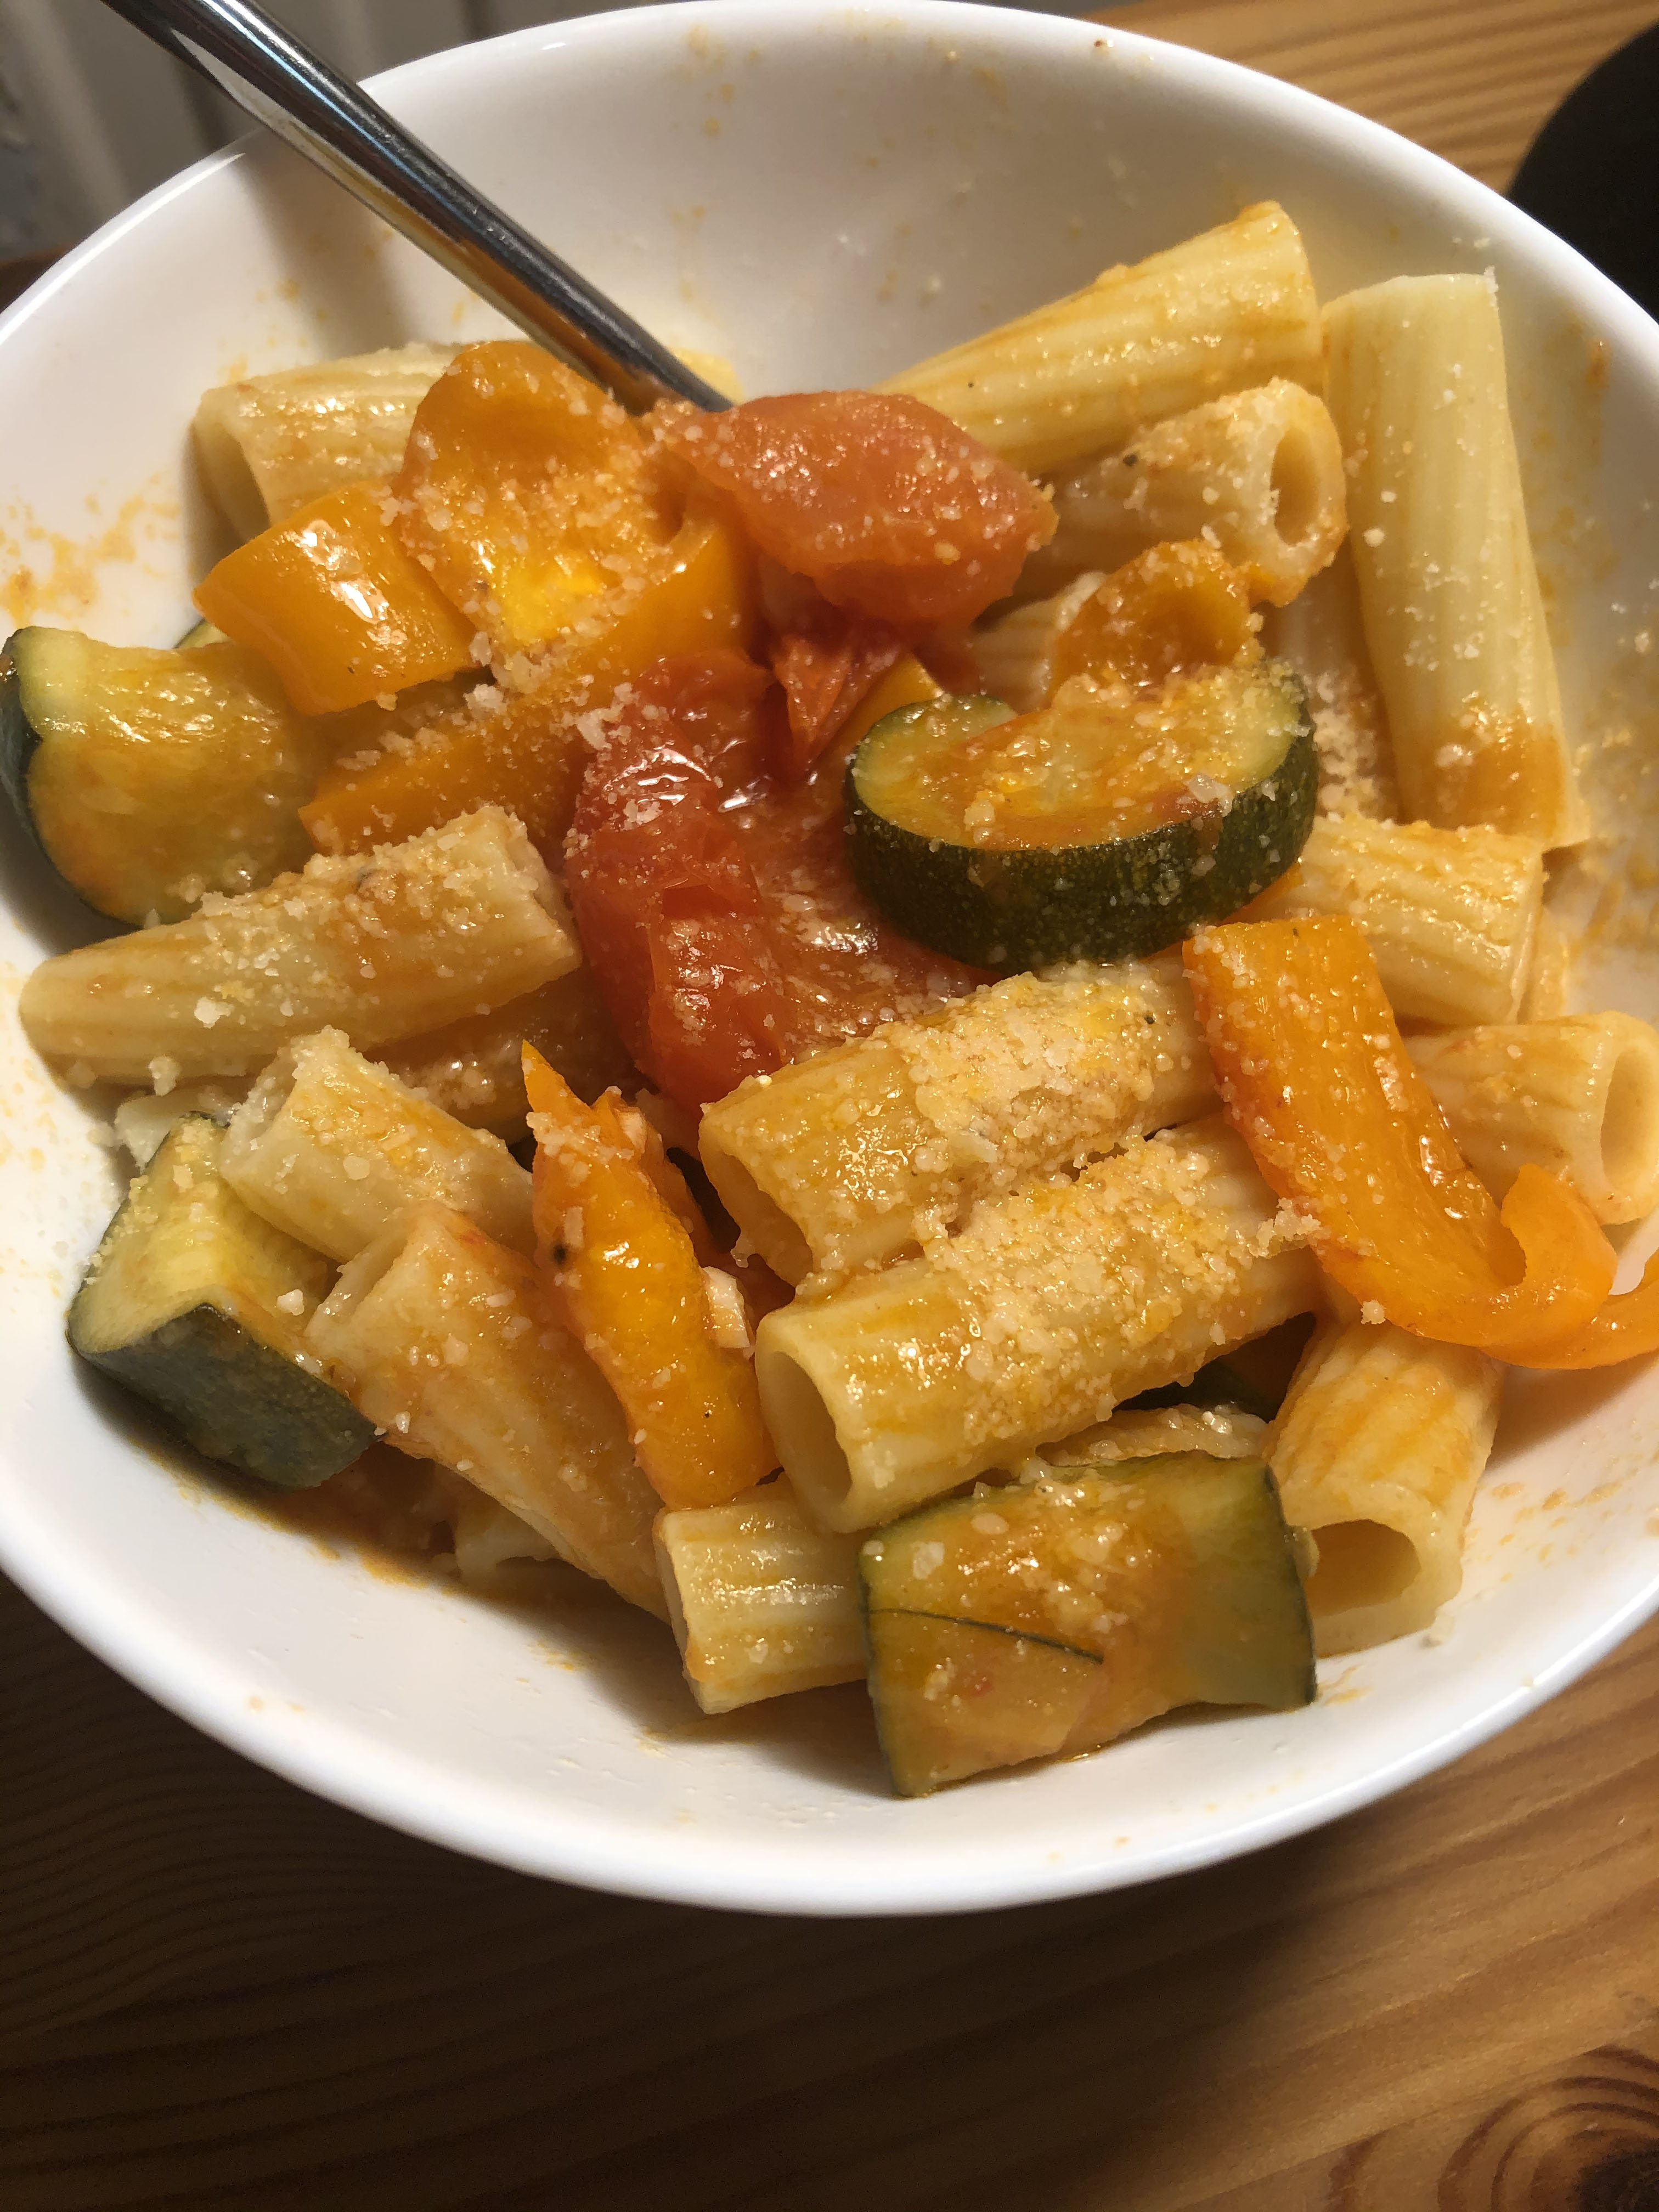 Bowl of rigatoni with a sprinkling of Parmigiano-Reggiano